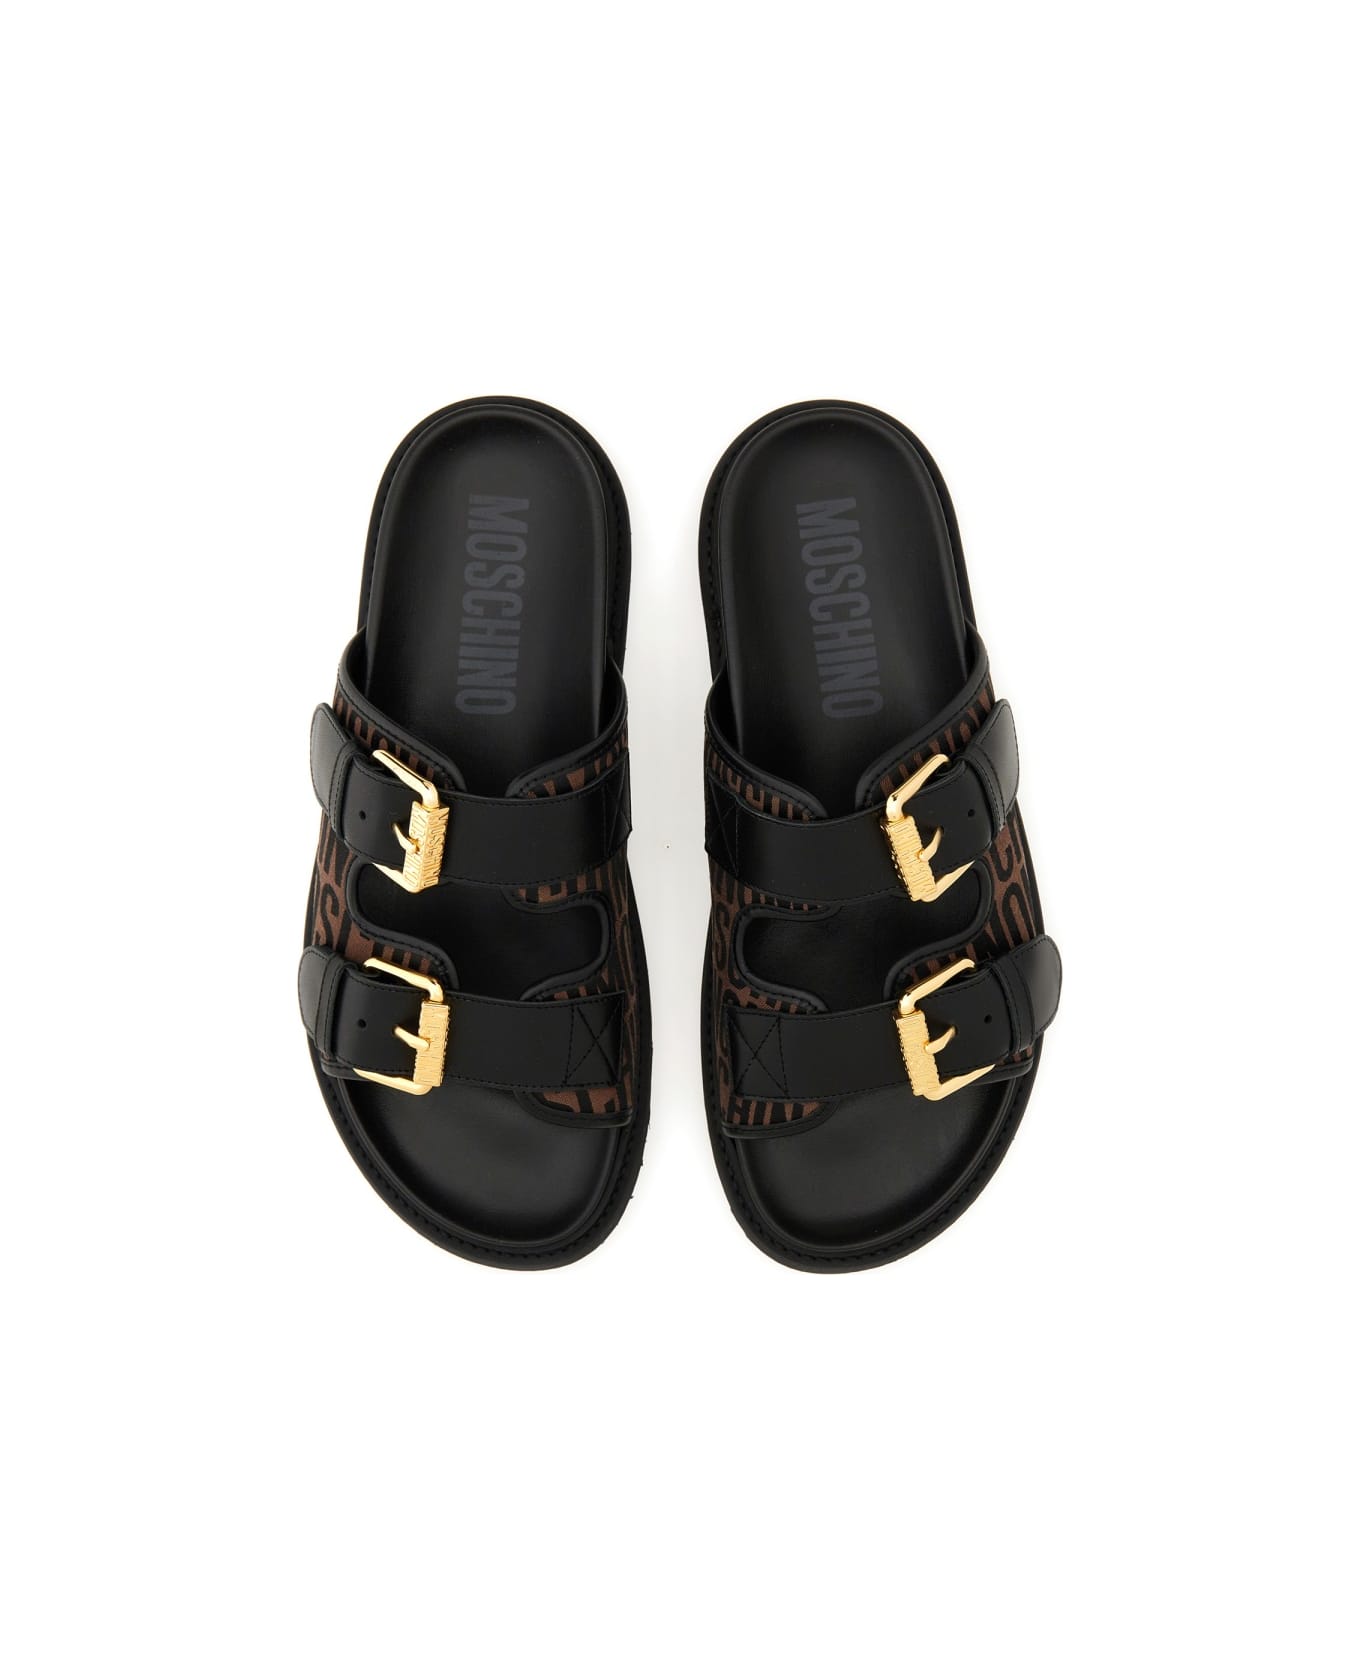 Moschino Slide Sandal With Logo - BLACK その他各種シューズ